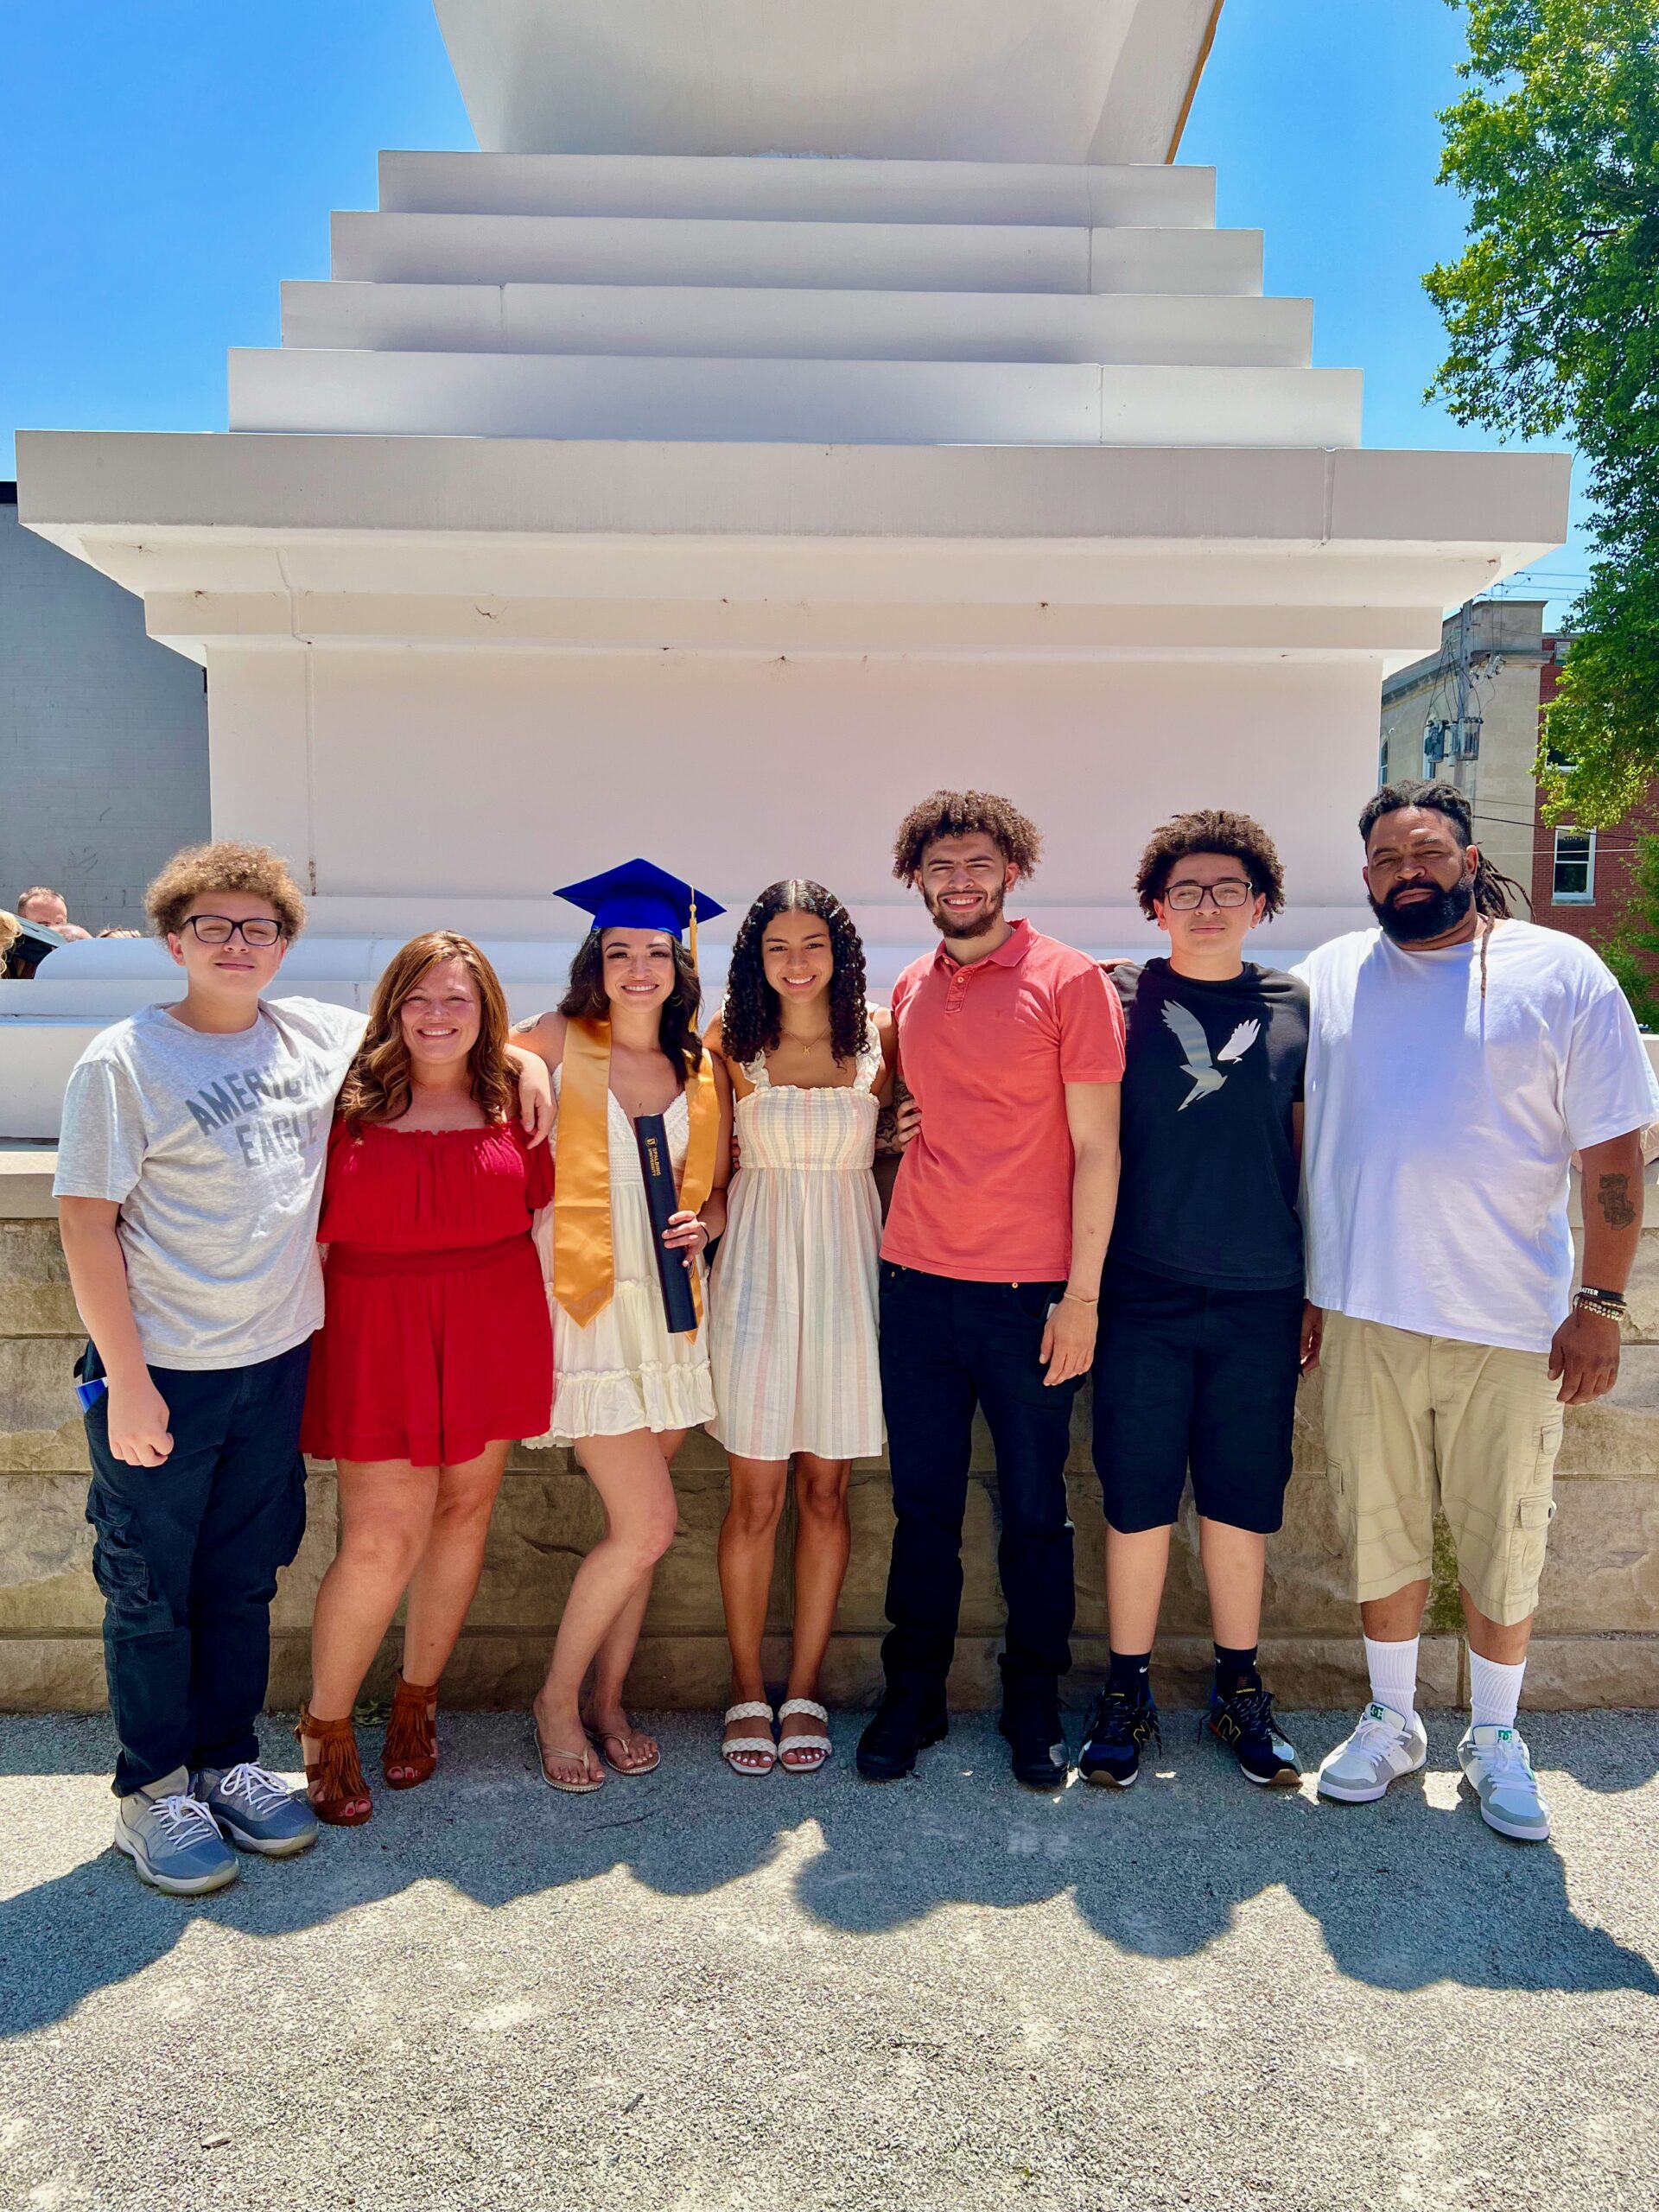 Spalding bachelor's graduate posing with family for photo outside